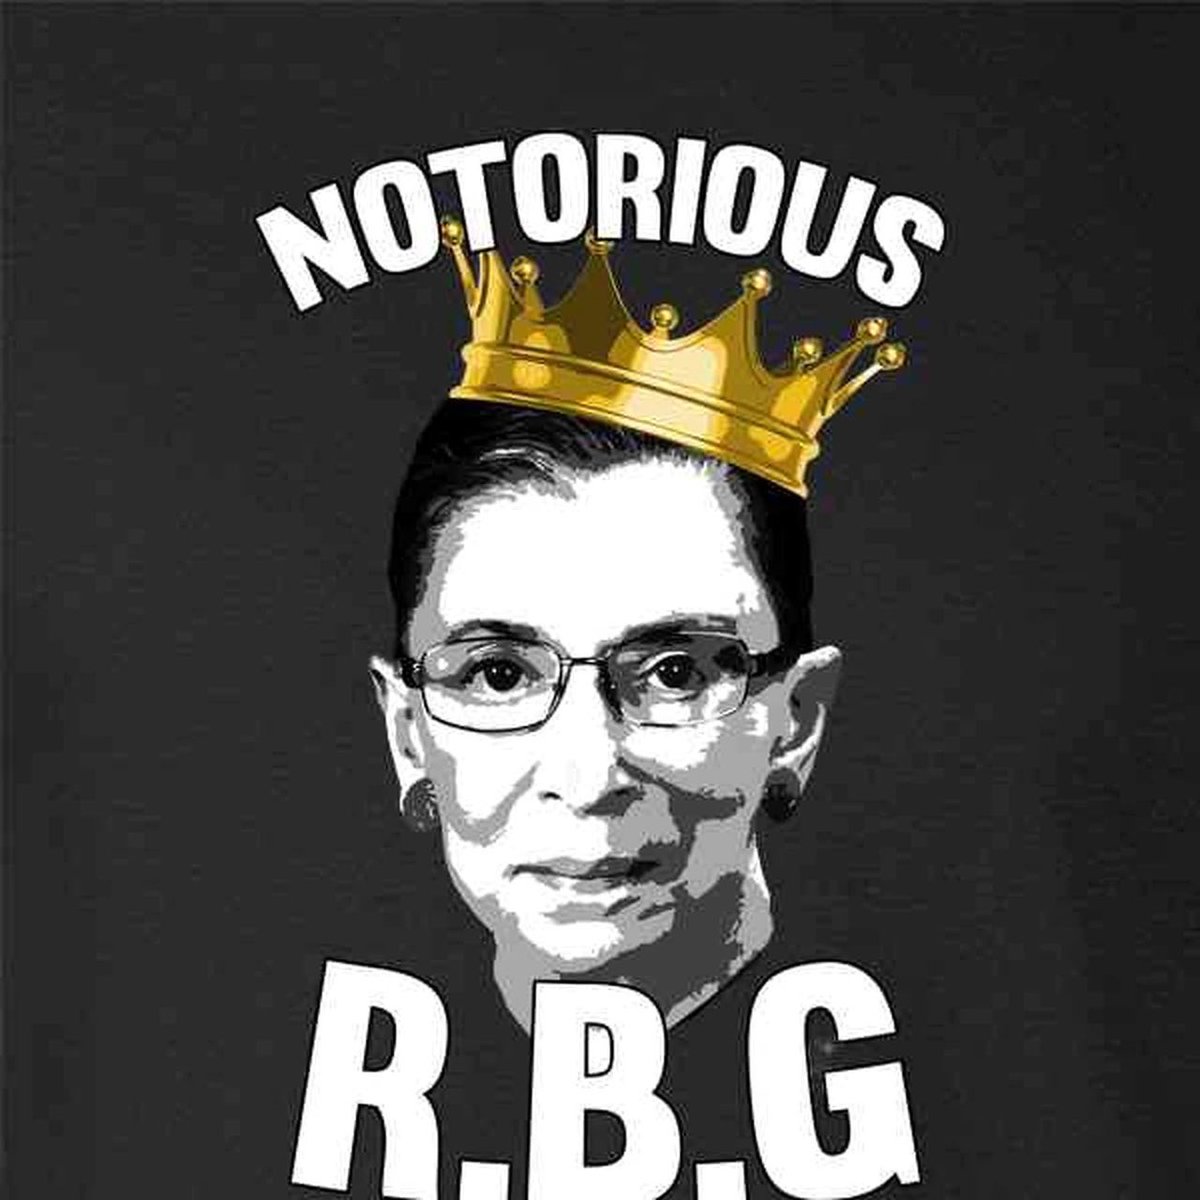 May we teach our students to speak with the conviction, eloquence, and intelligence as Ruth Bader Ginsberg. #collarofdissent #rbg #socialjustice